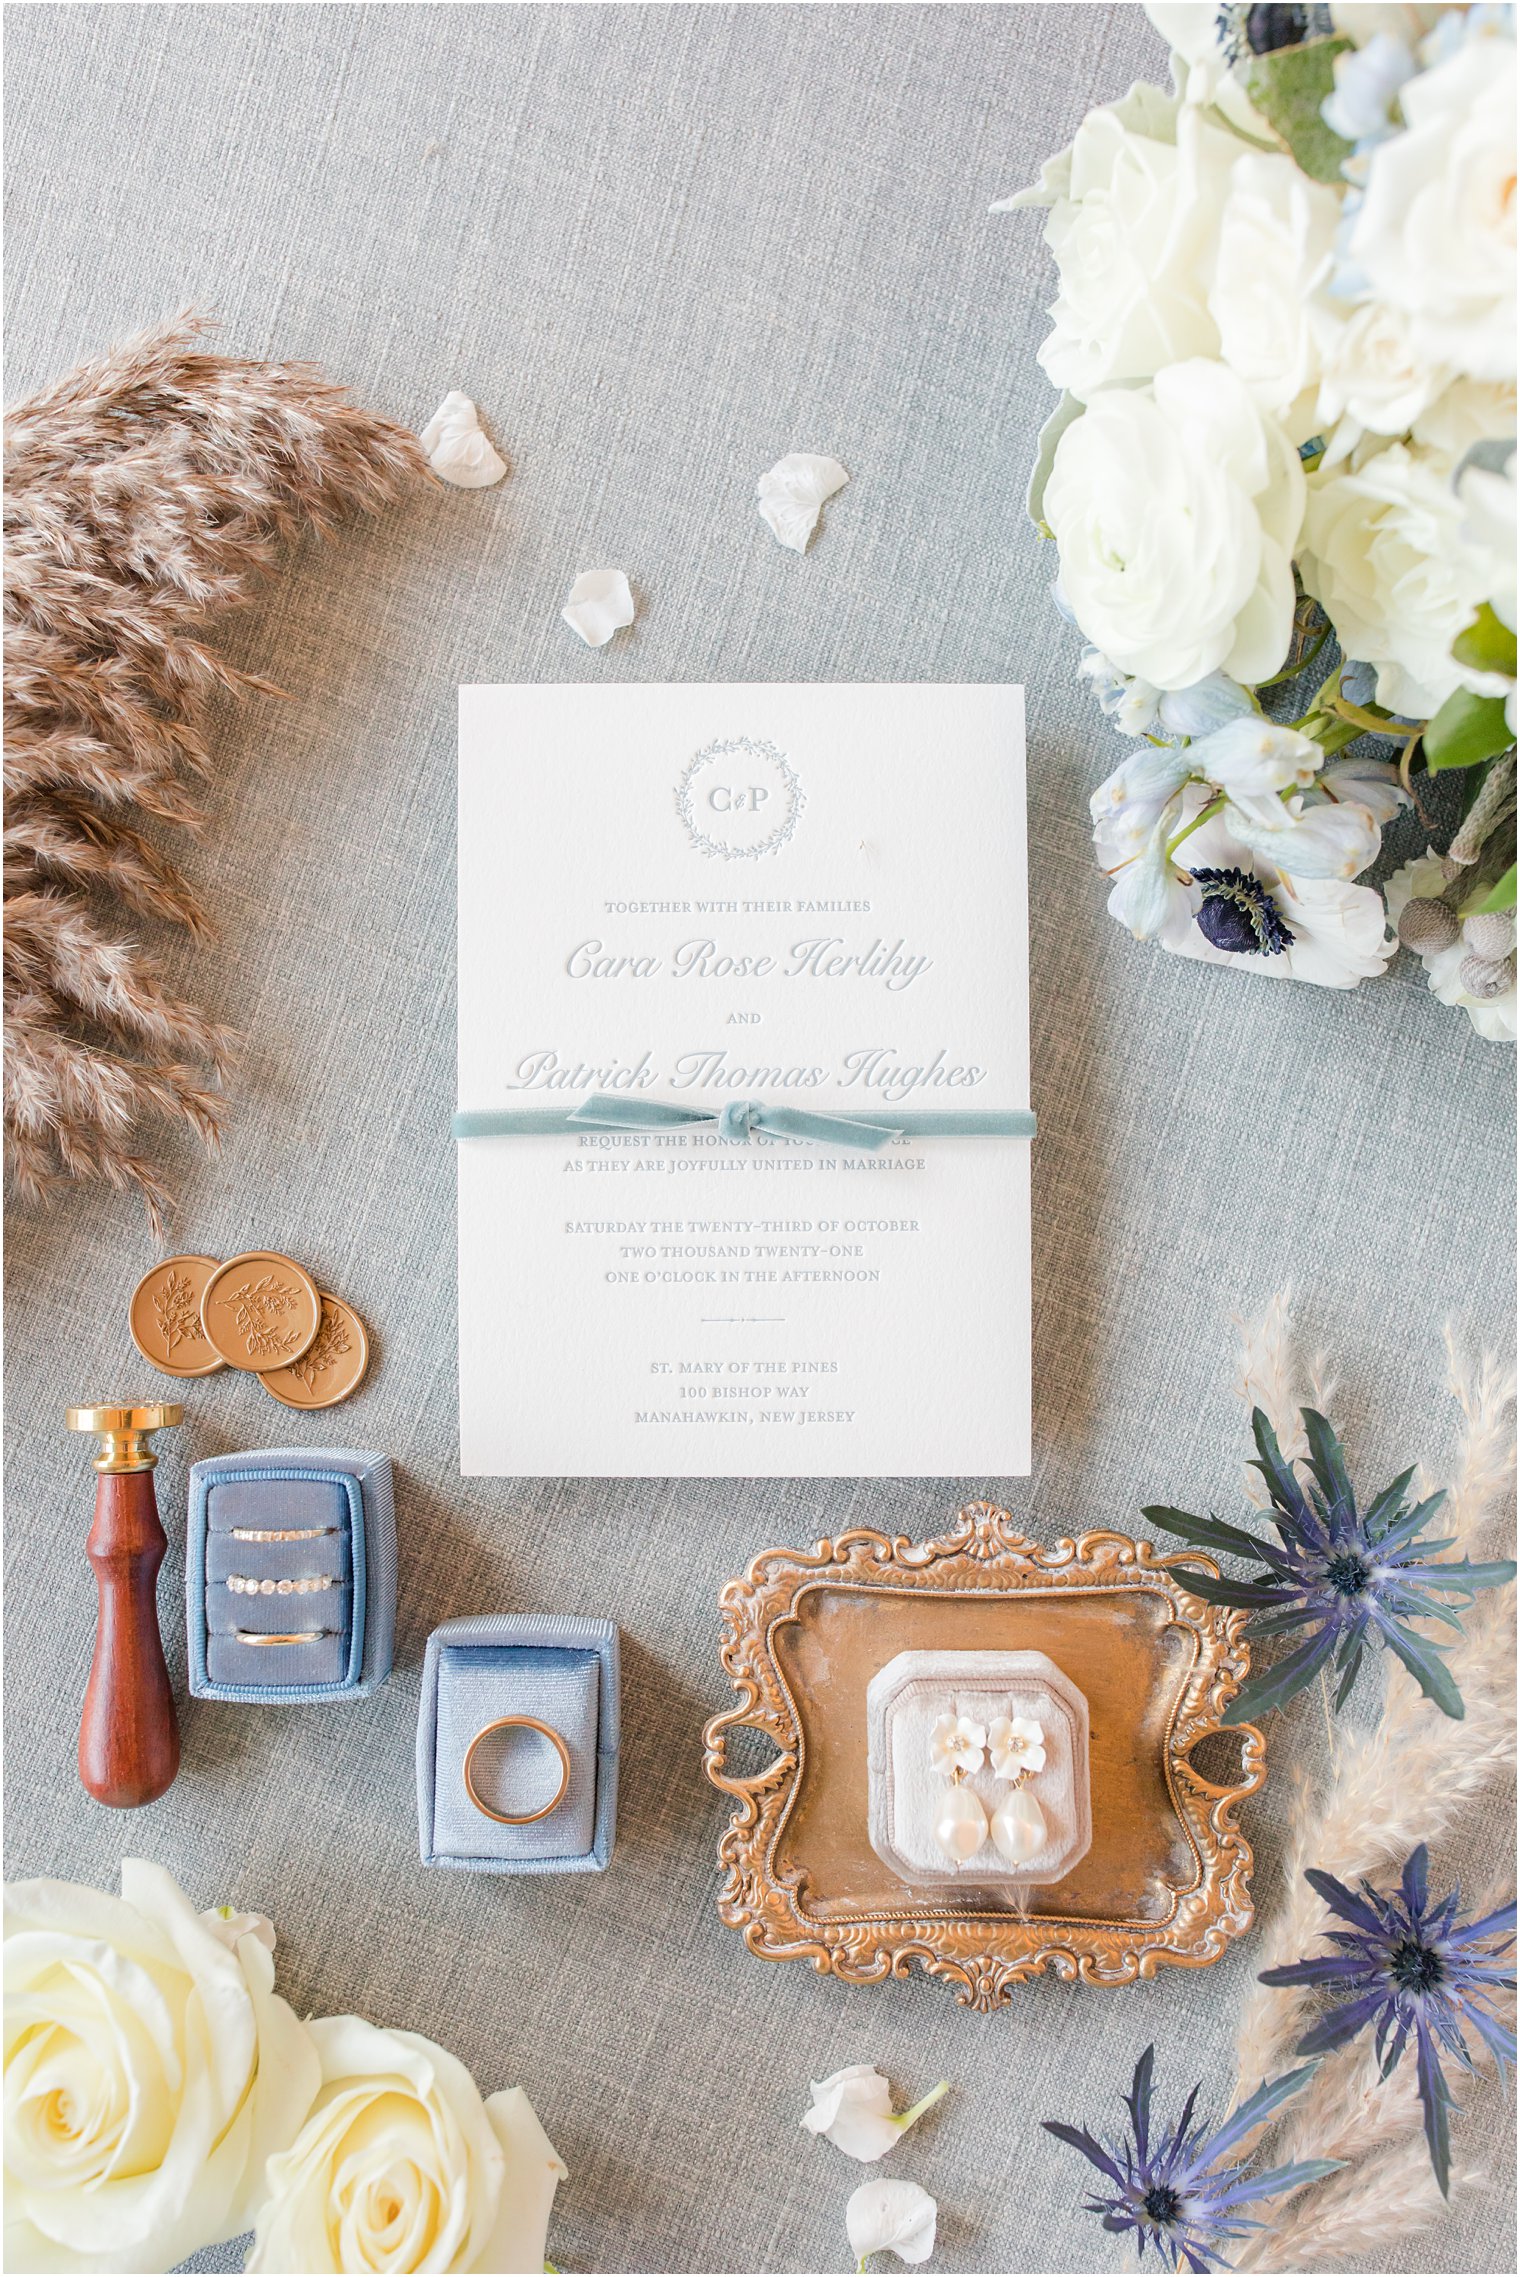 classic invitation suite with blue ribbon for fall wedding day